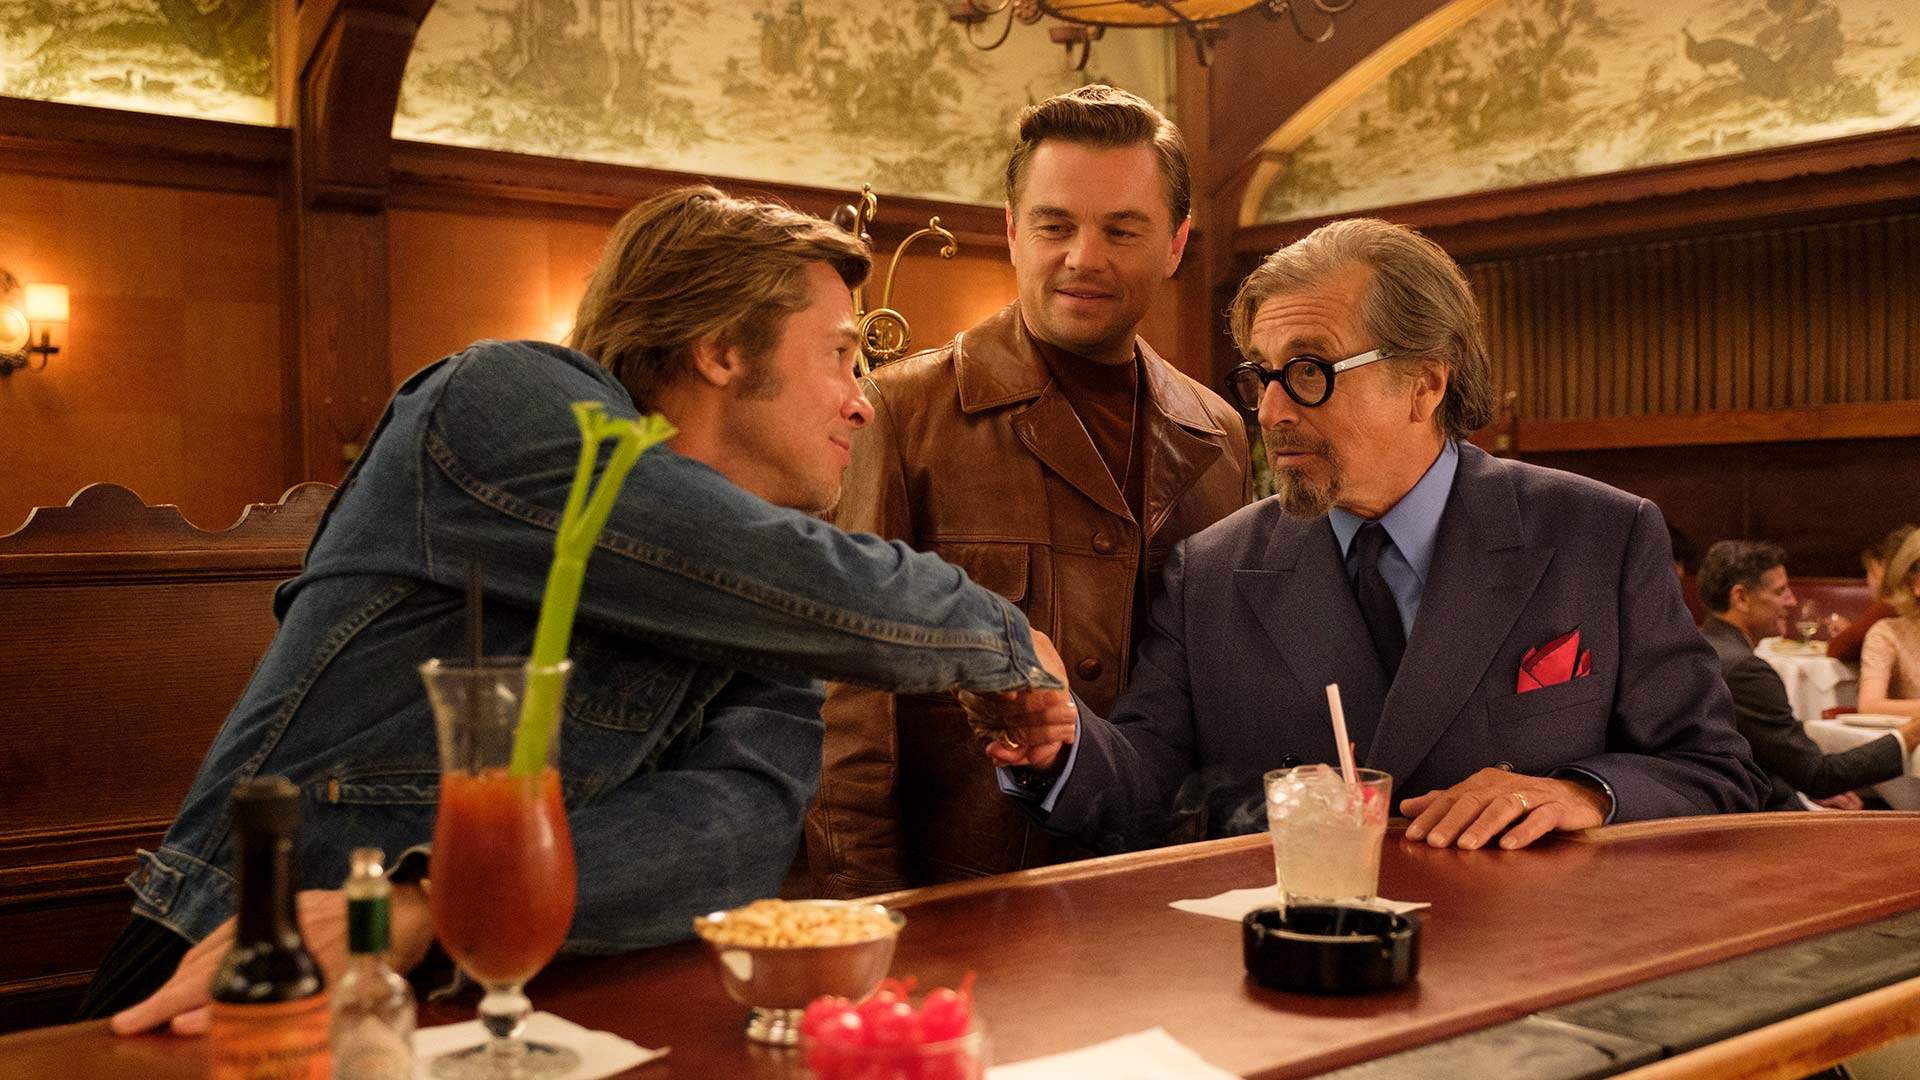 We're Giving Away Dinner and Double Passes to Tarantino's 'Once Upon a Time... in Hollywood'